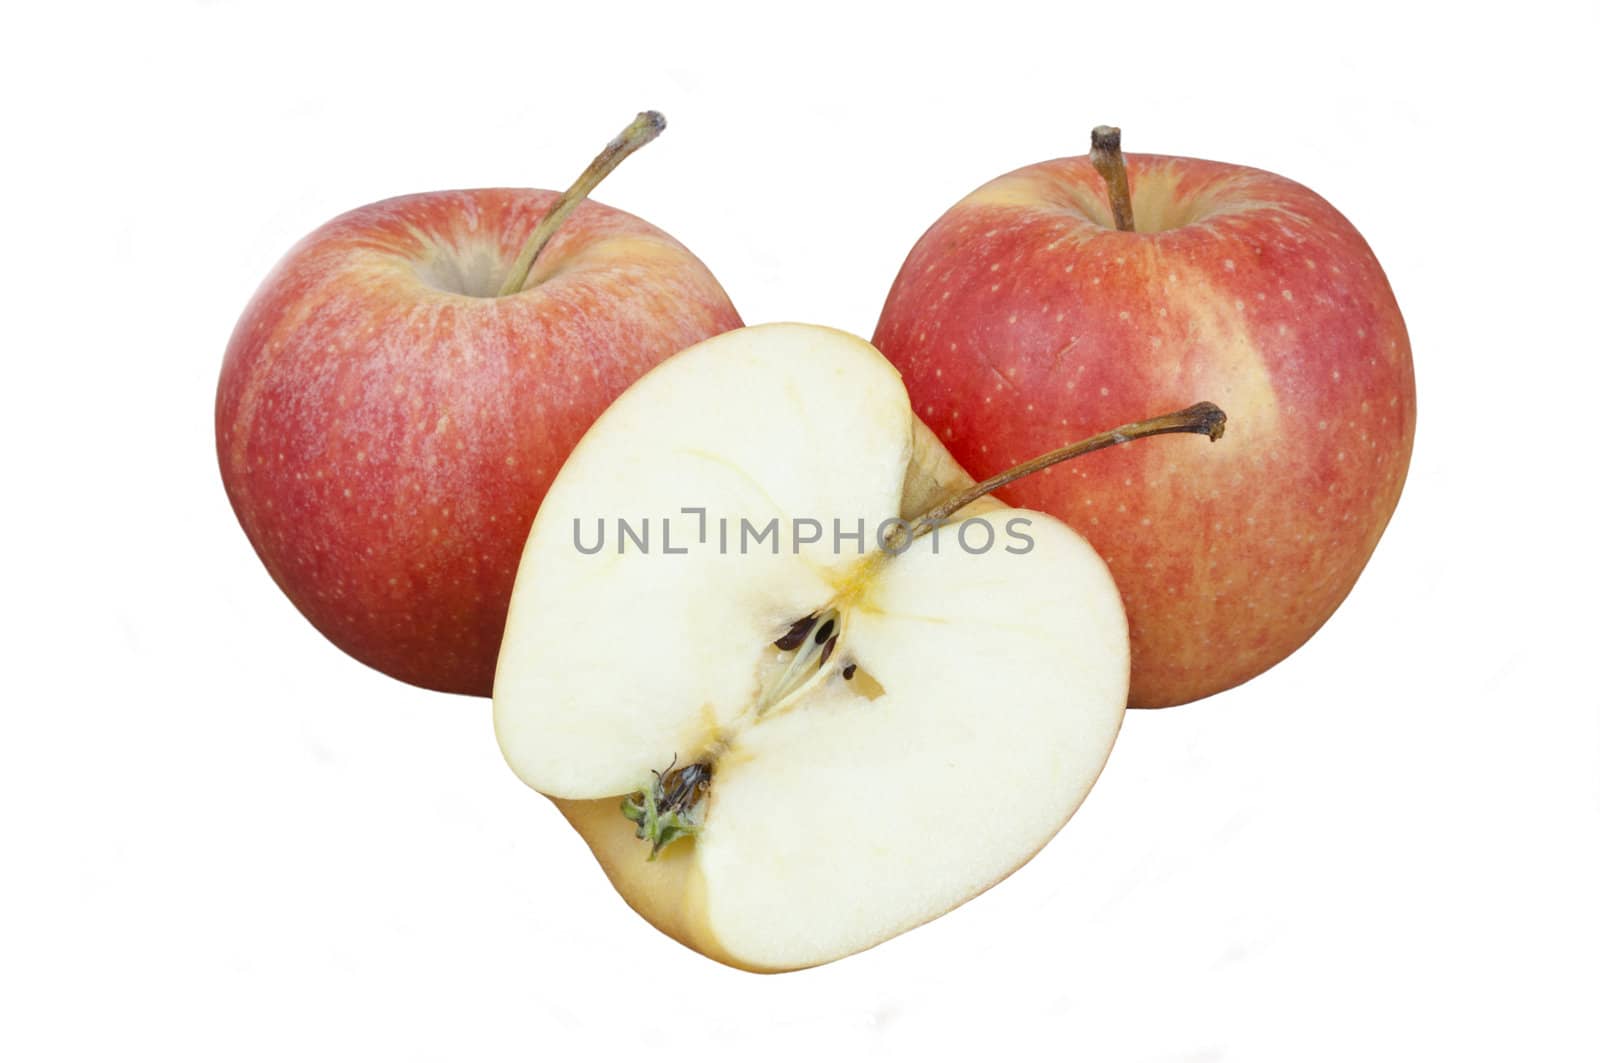 Fres ripe apples over white background